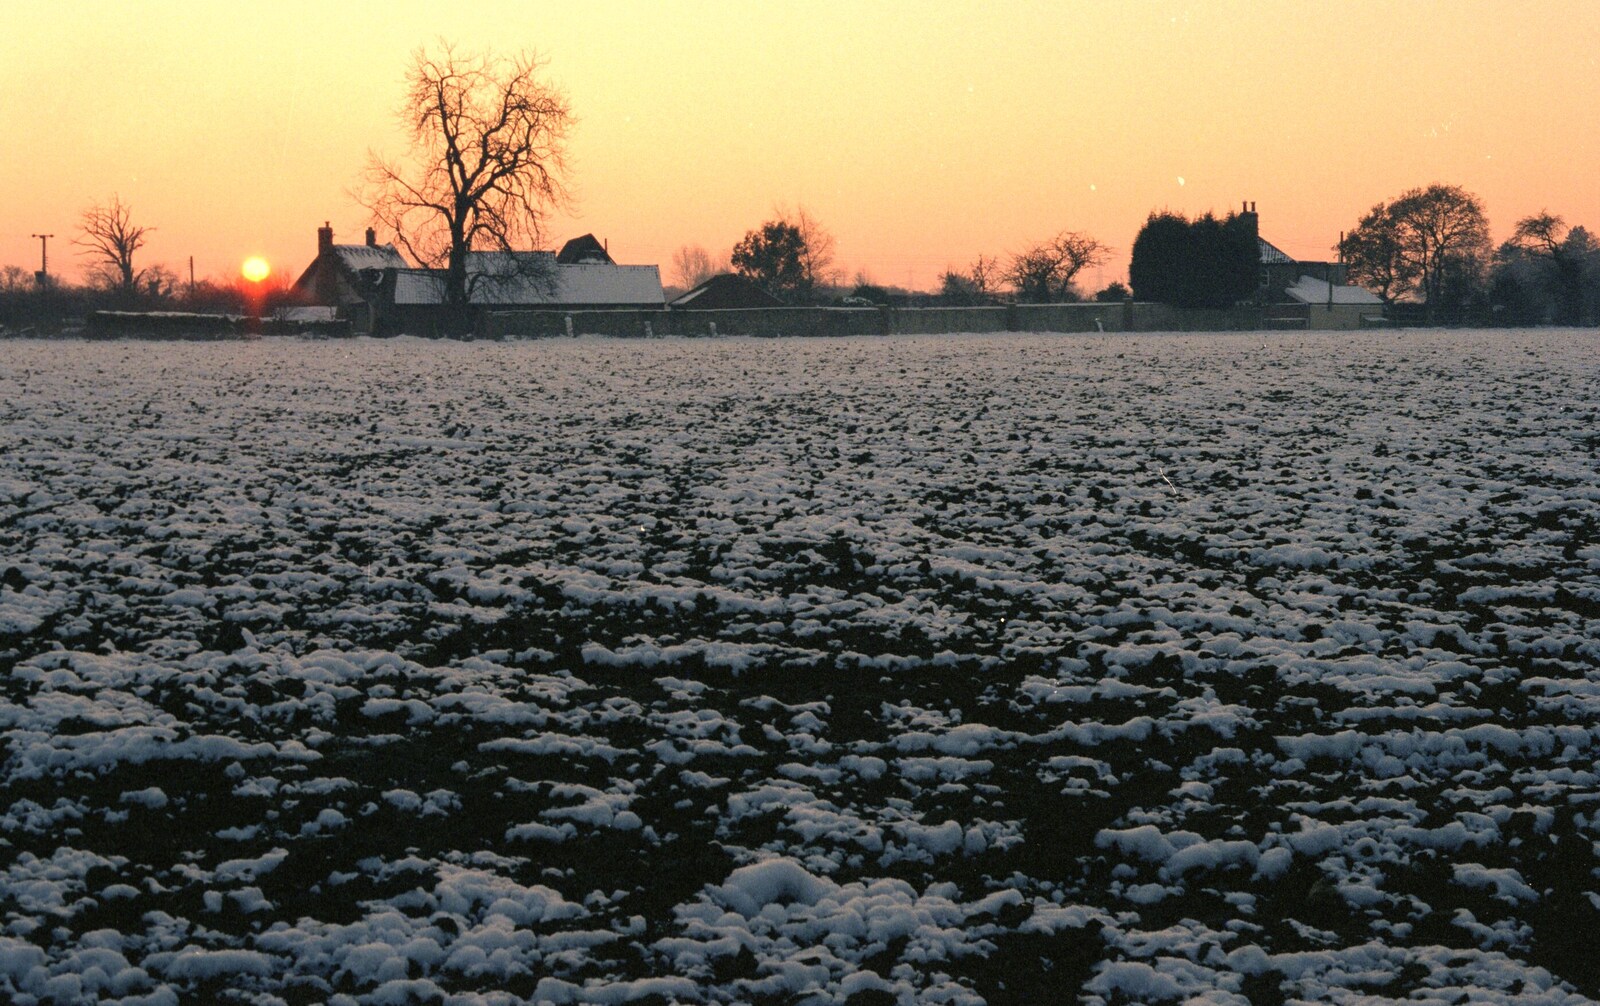 Snow in the field, with a low sun from The CISU Internet Team, Bedroom Building and Ferries, Suffolk - 16th February 1996